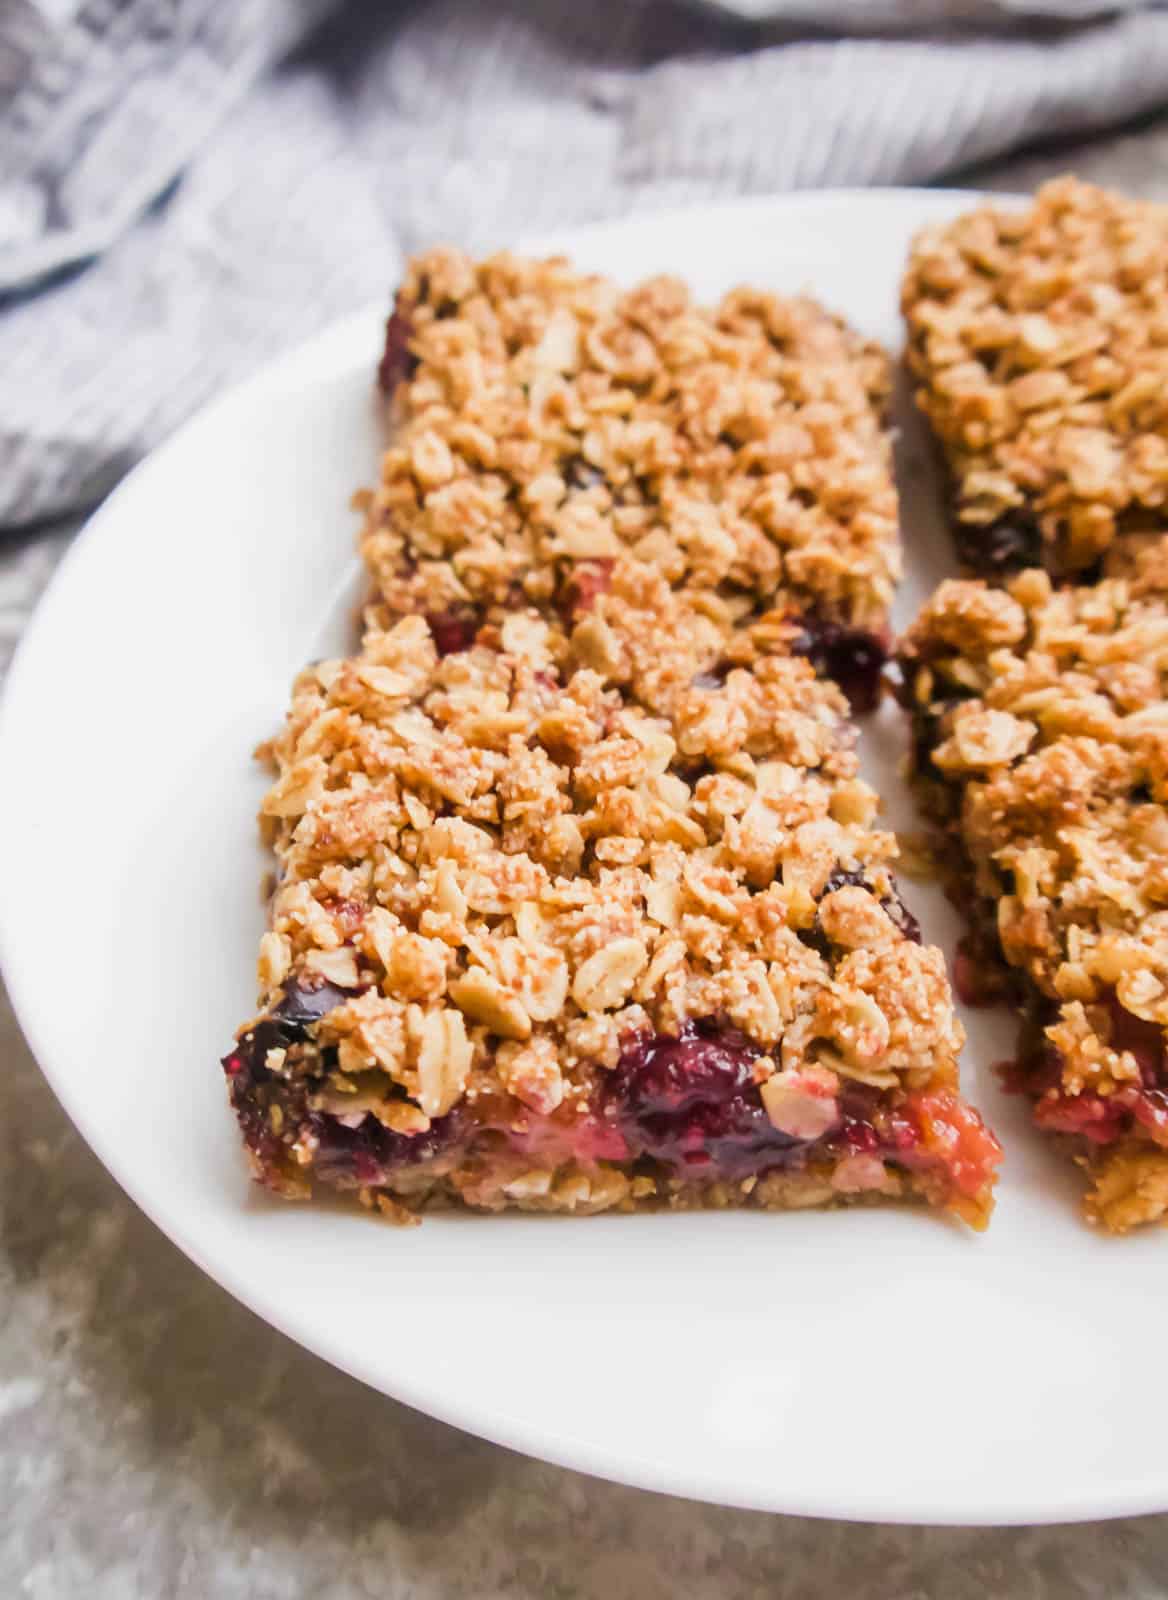 Oat berry bars cut into squares and on a plate.